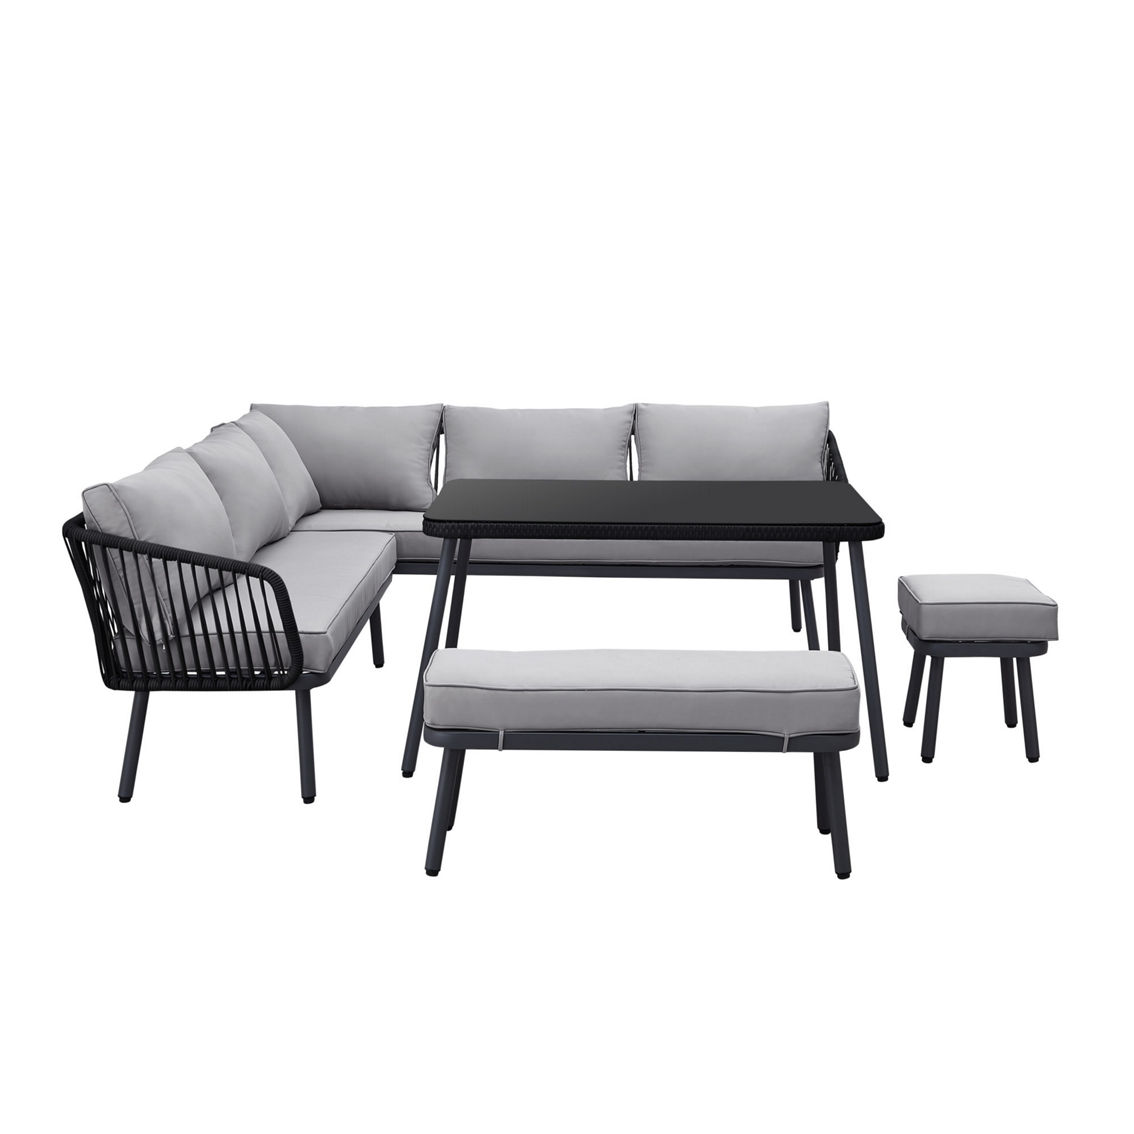 Inspired Home Razan Outdoor Rattan Wicker 5pc Seating Group - Image 3 of 5